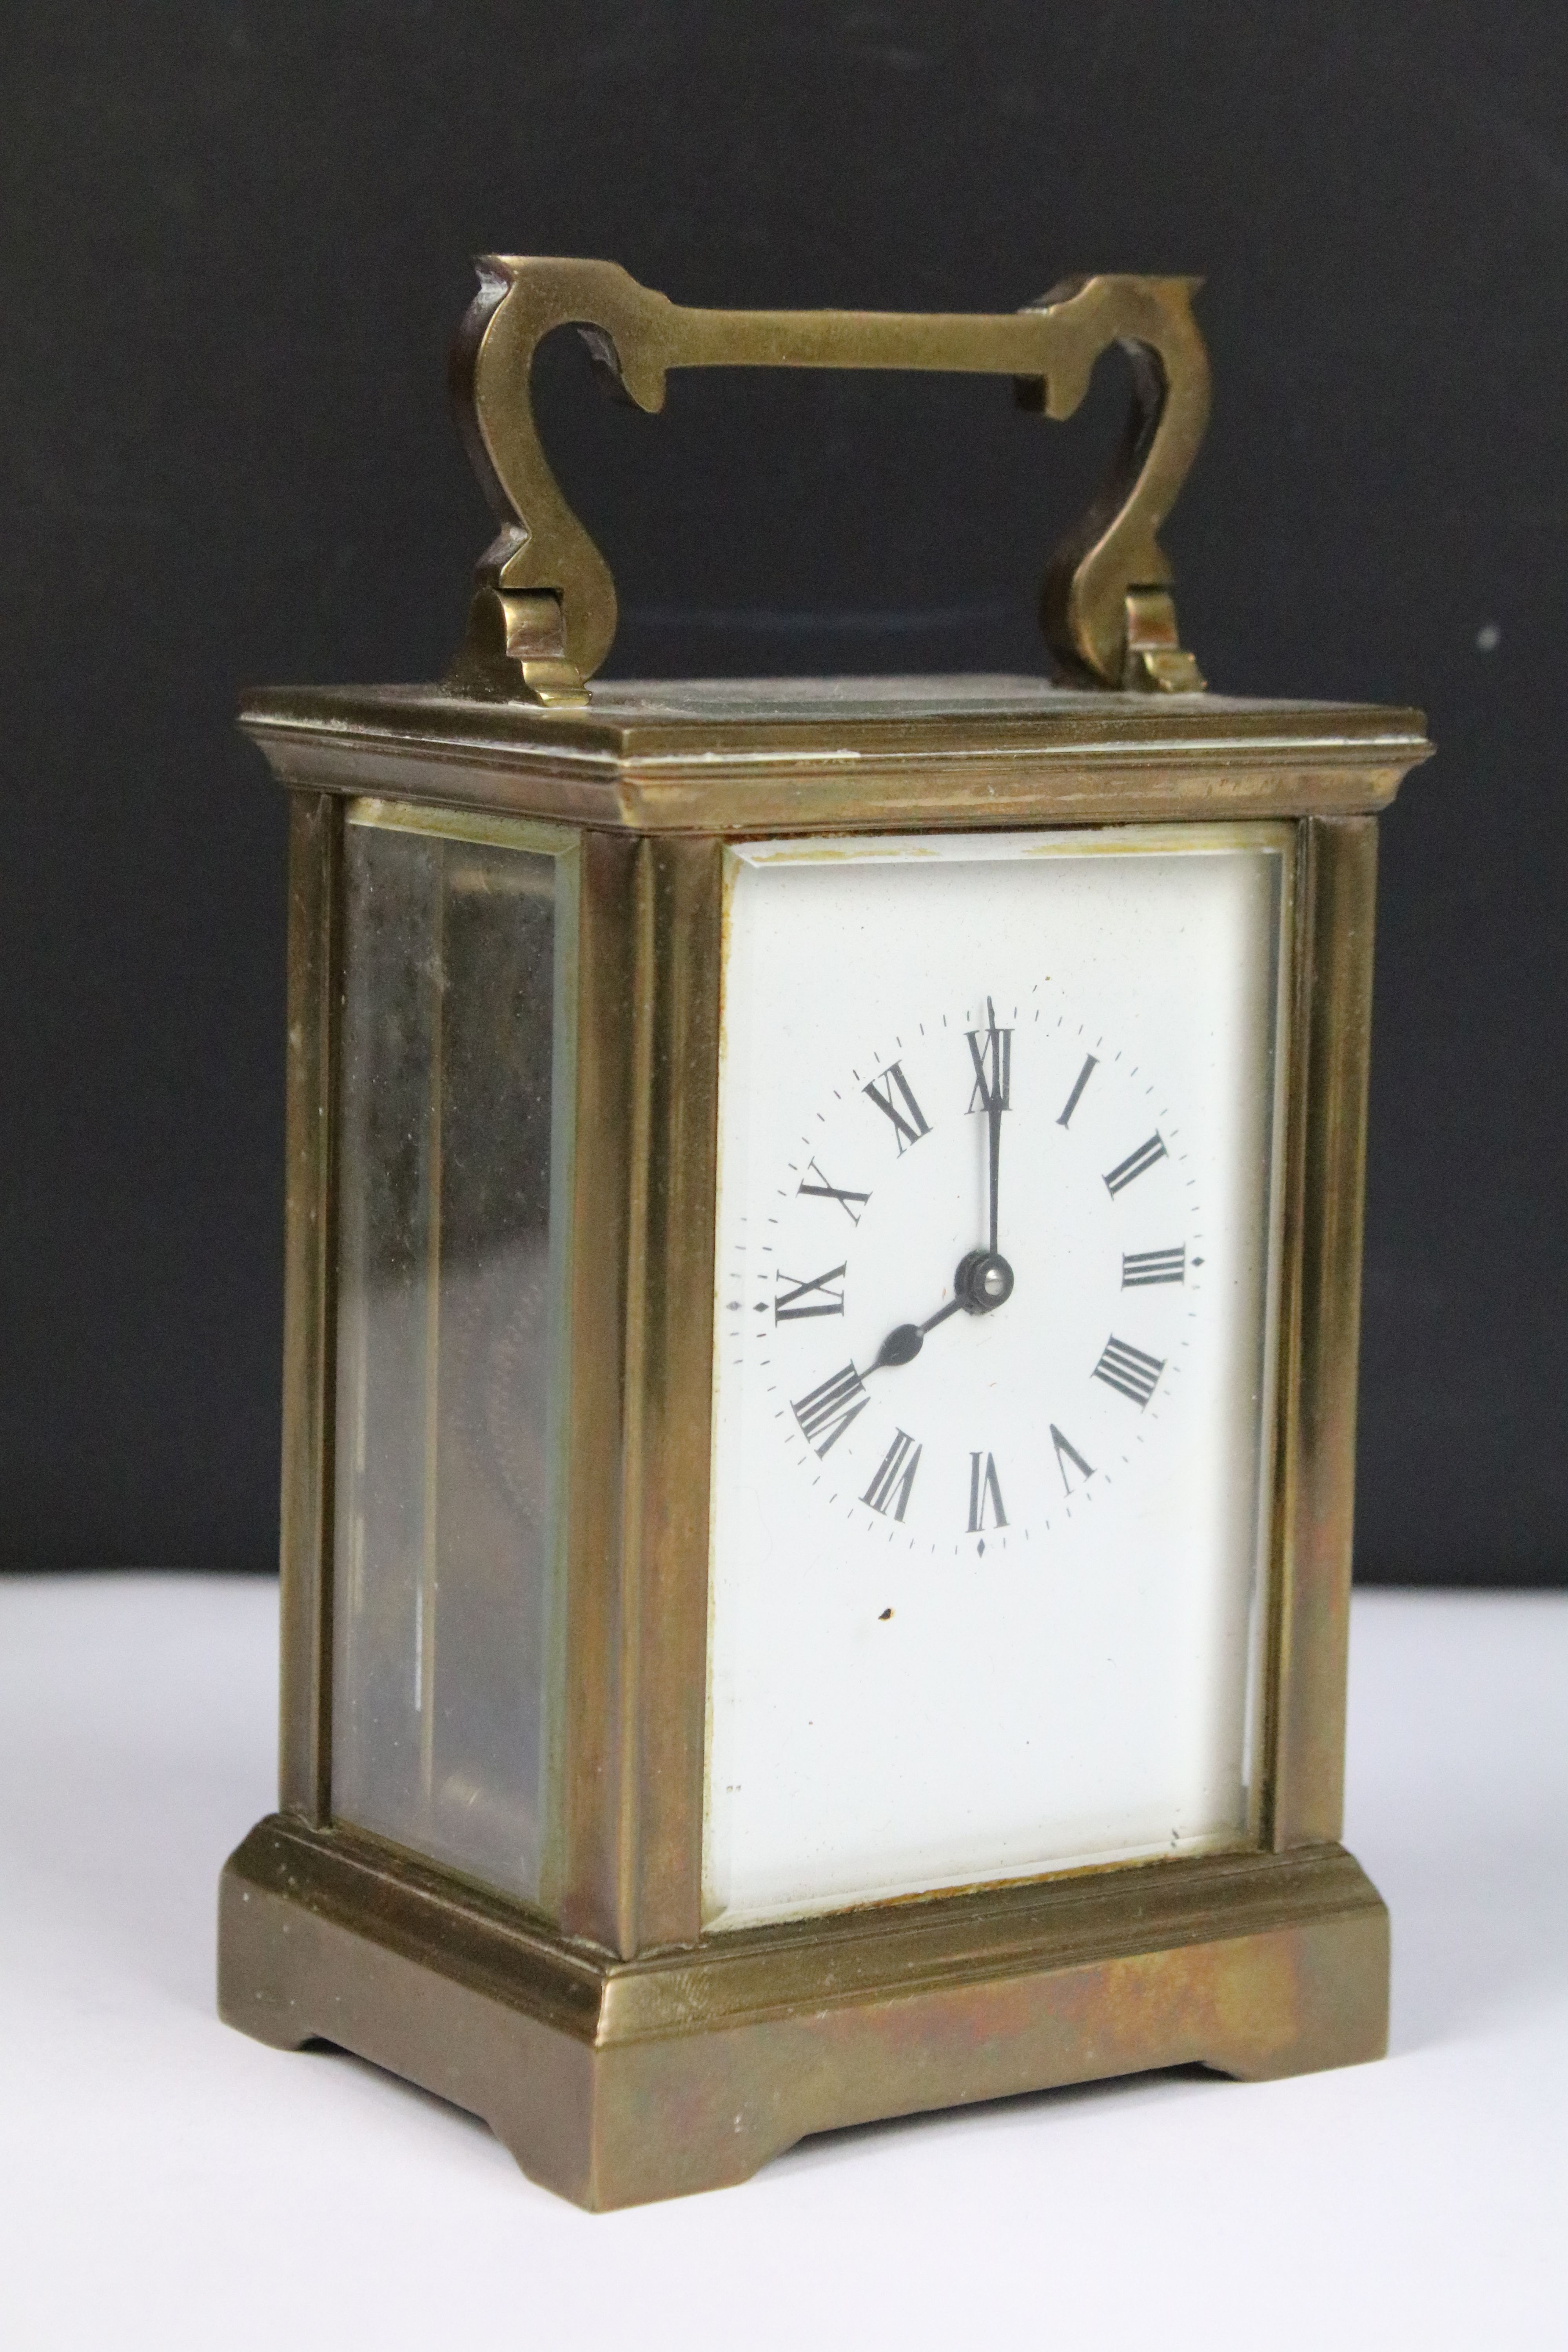 Two vintage brass cased carriage clocks with beveled glass panels and white enamel dials. - Image 5 of 8